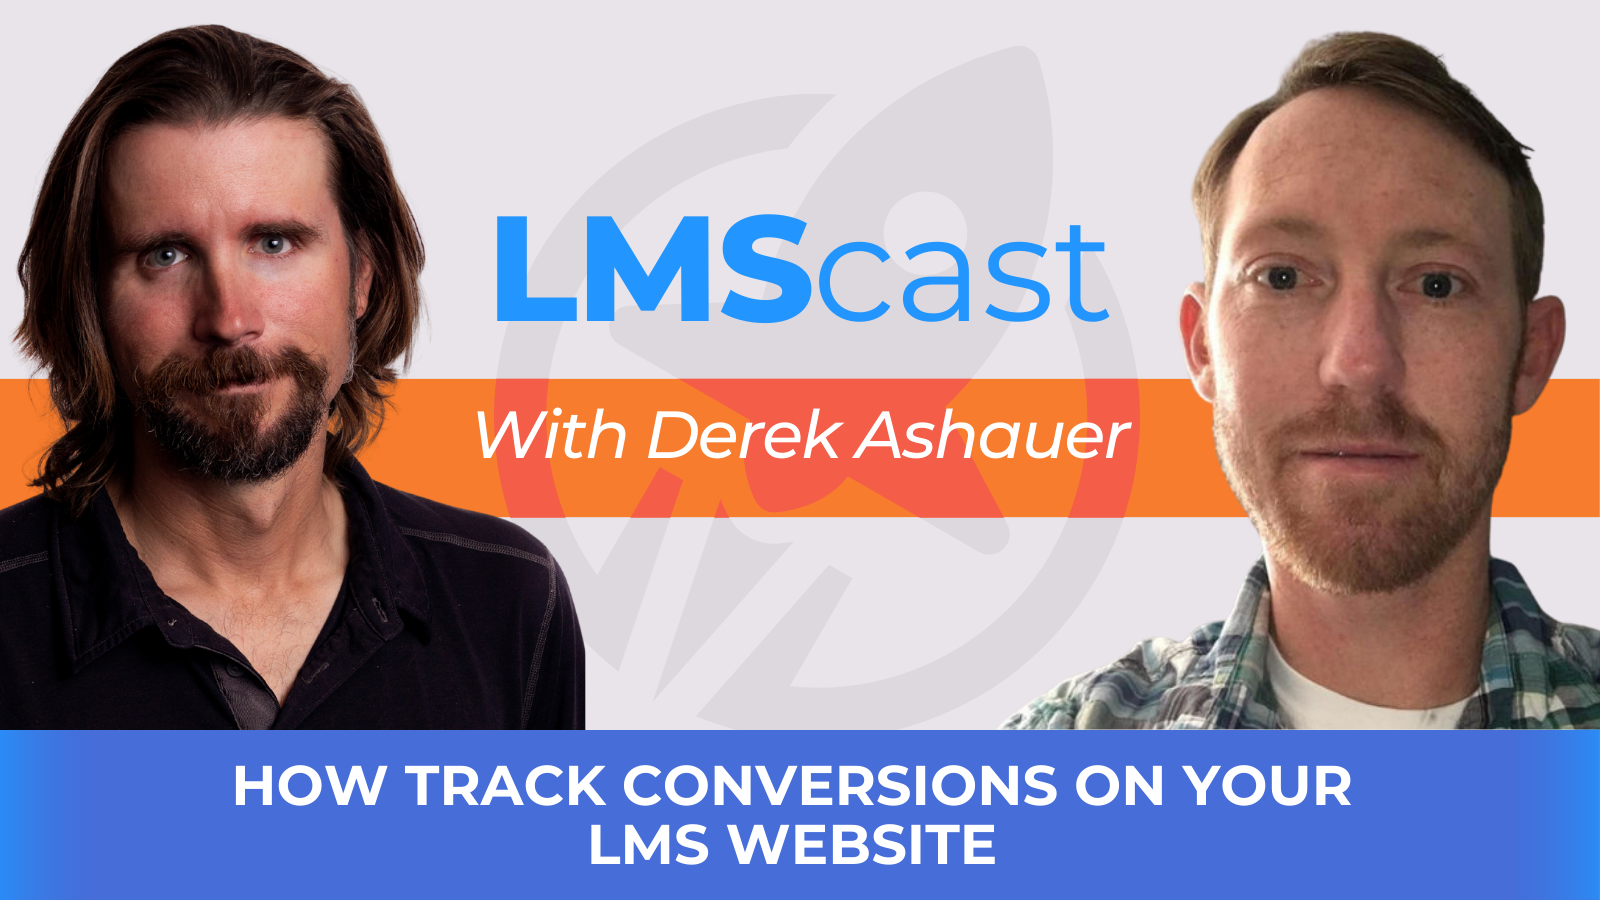 How Track Conversions on Your LMS Website with Derek Ashauer from Conversion Bridge